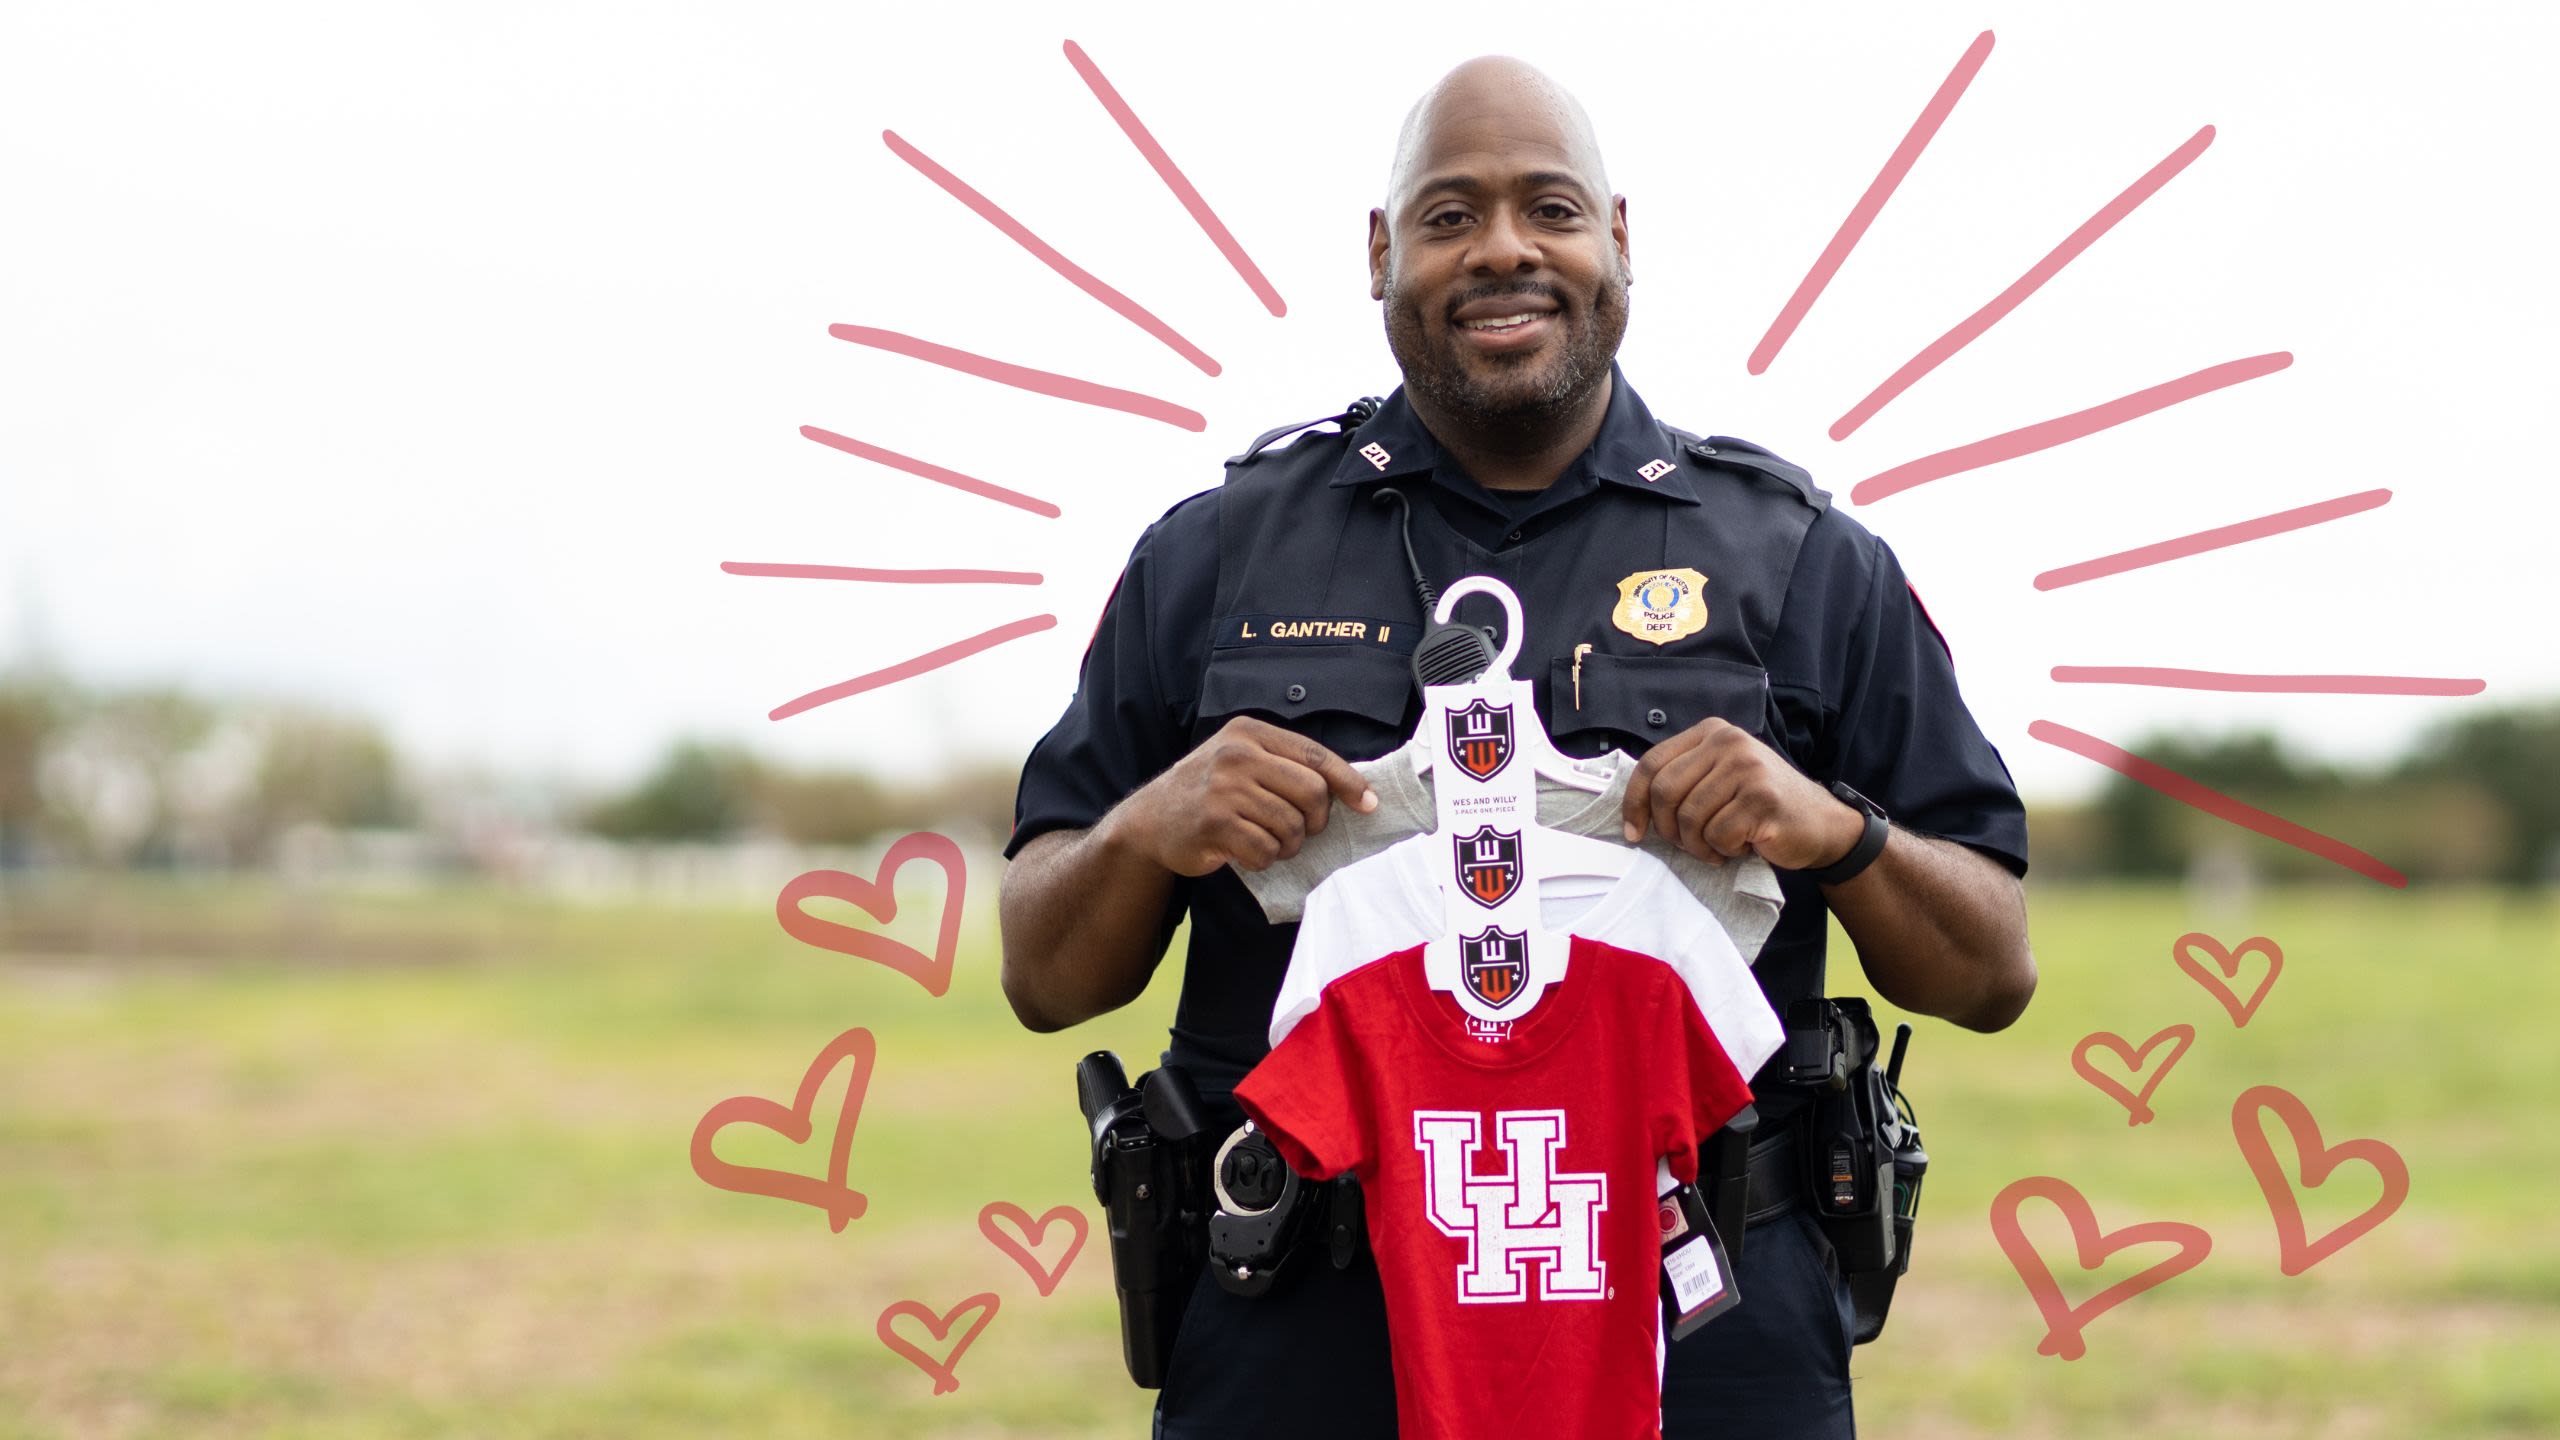 Sgt. Ganther in uniform holding a three-pack of UH-branded baby onesies